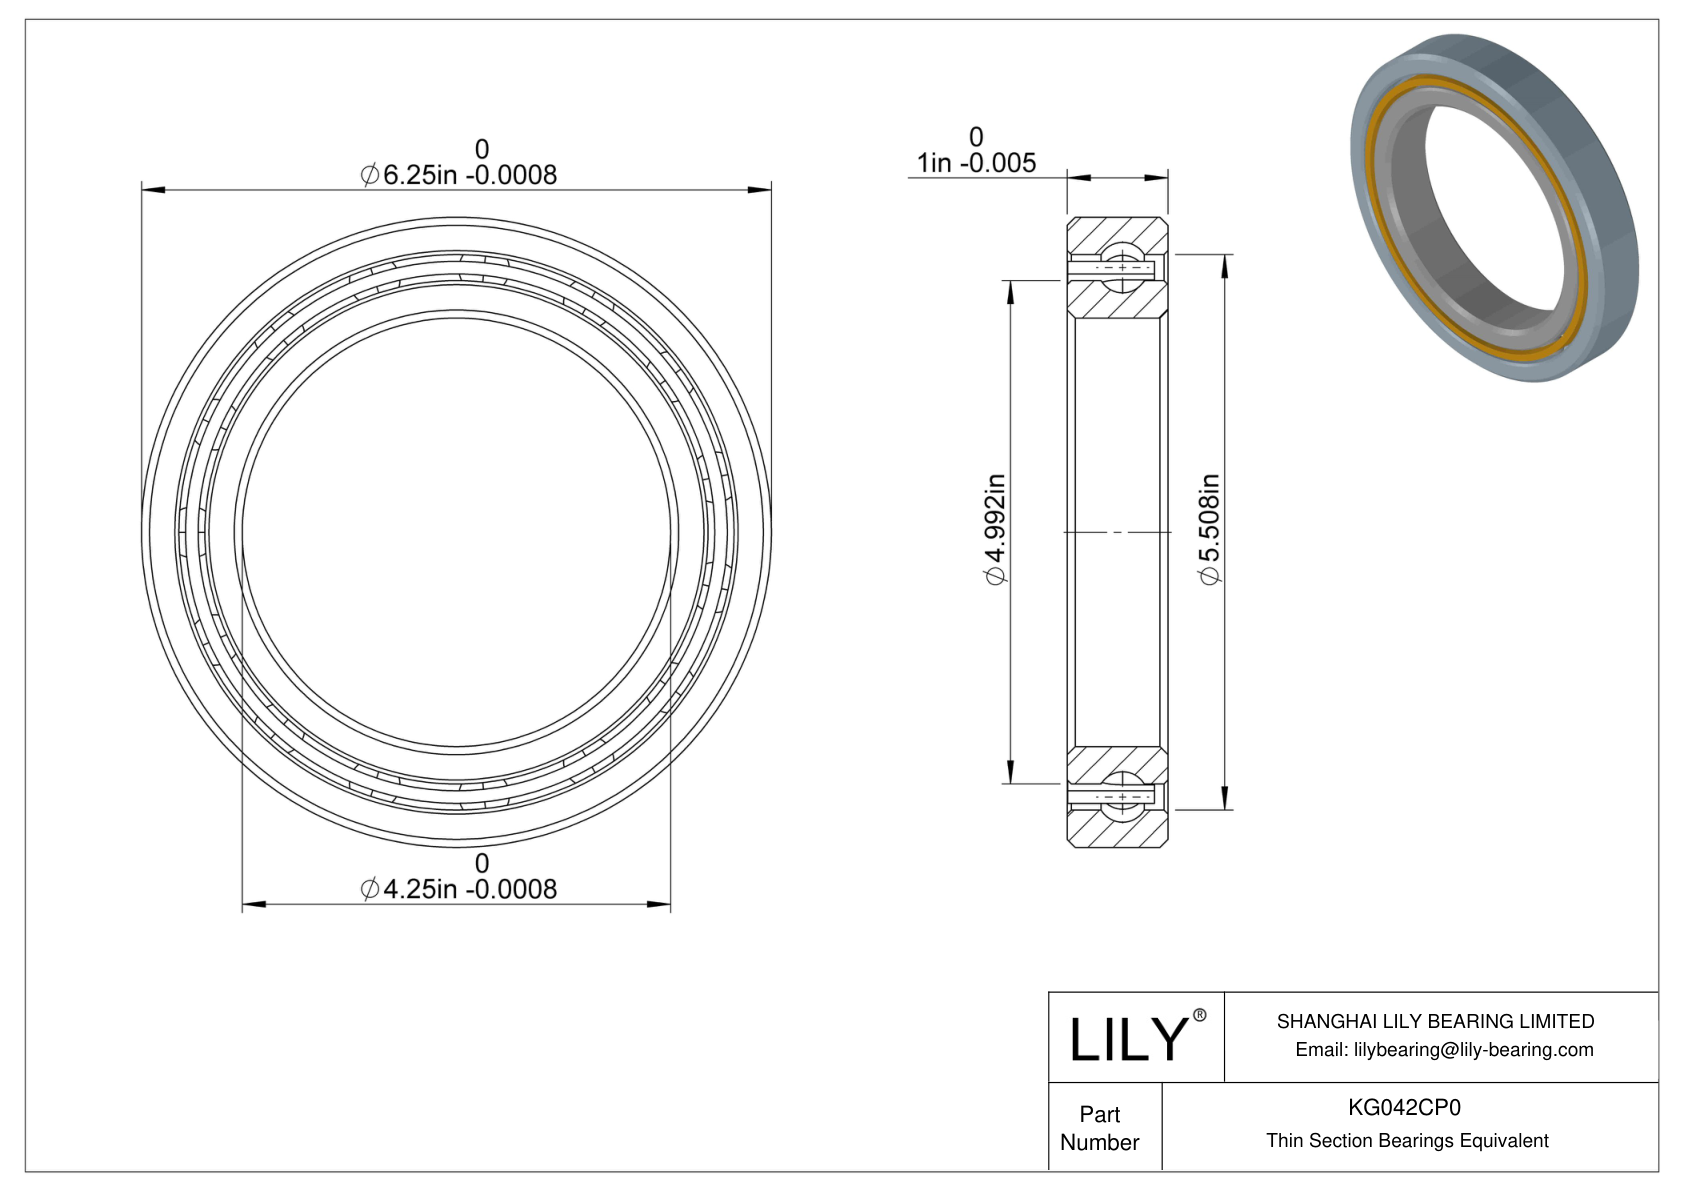 KG042CP0 Constant Section (CS) Bearings cad drawing